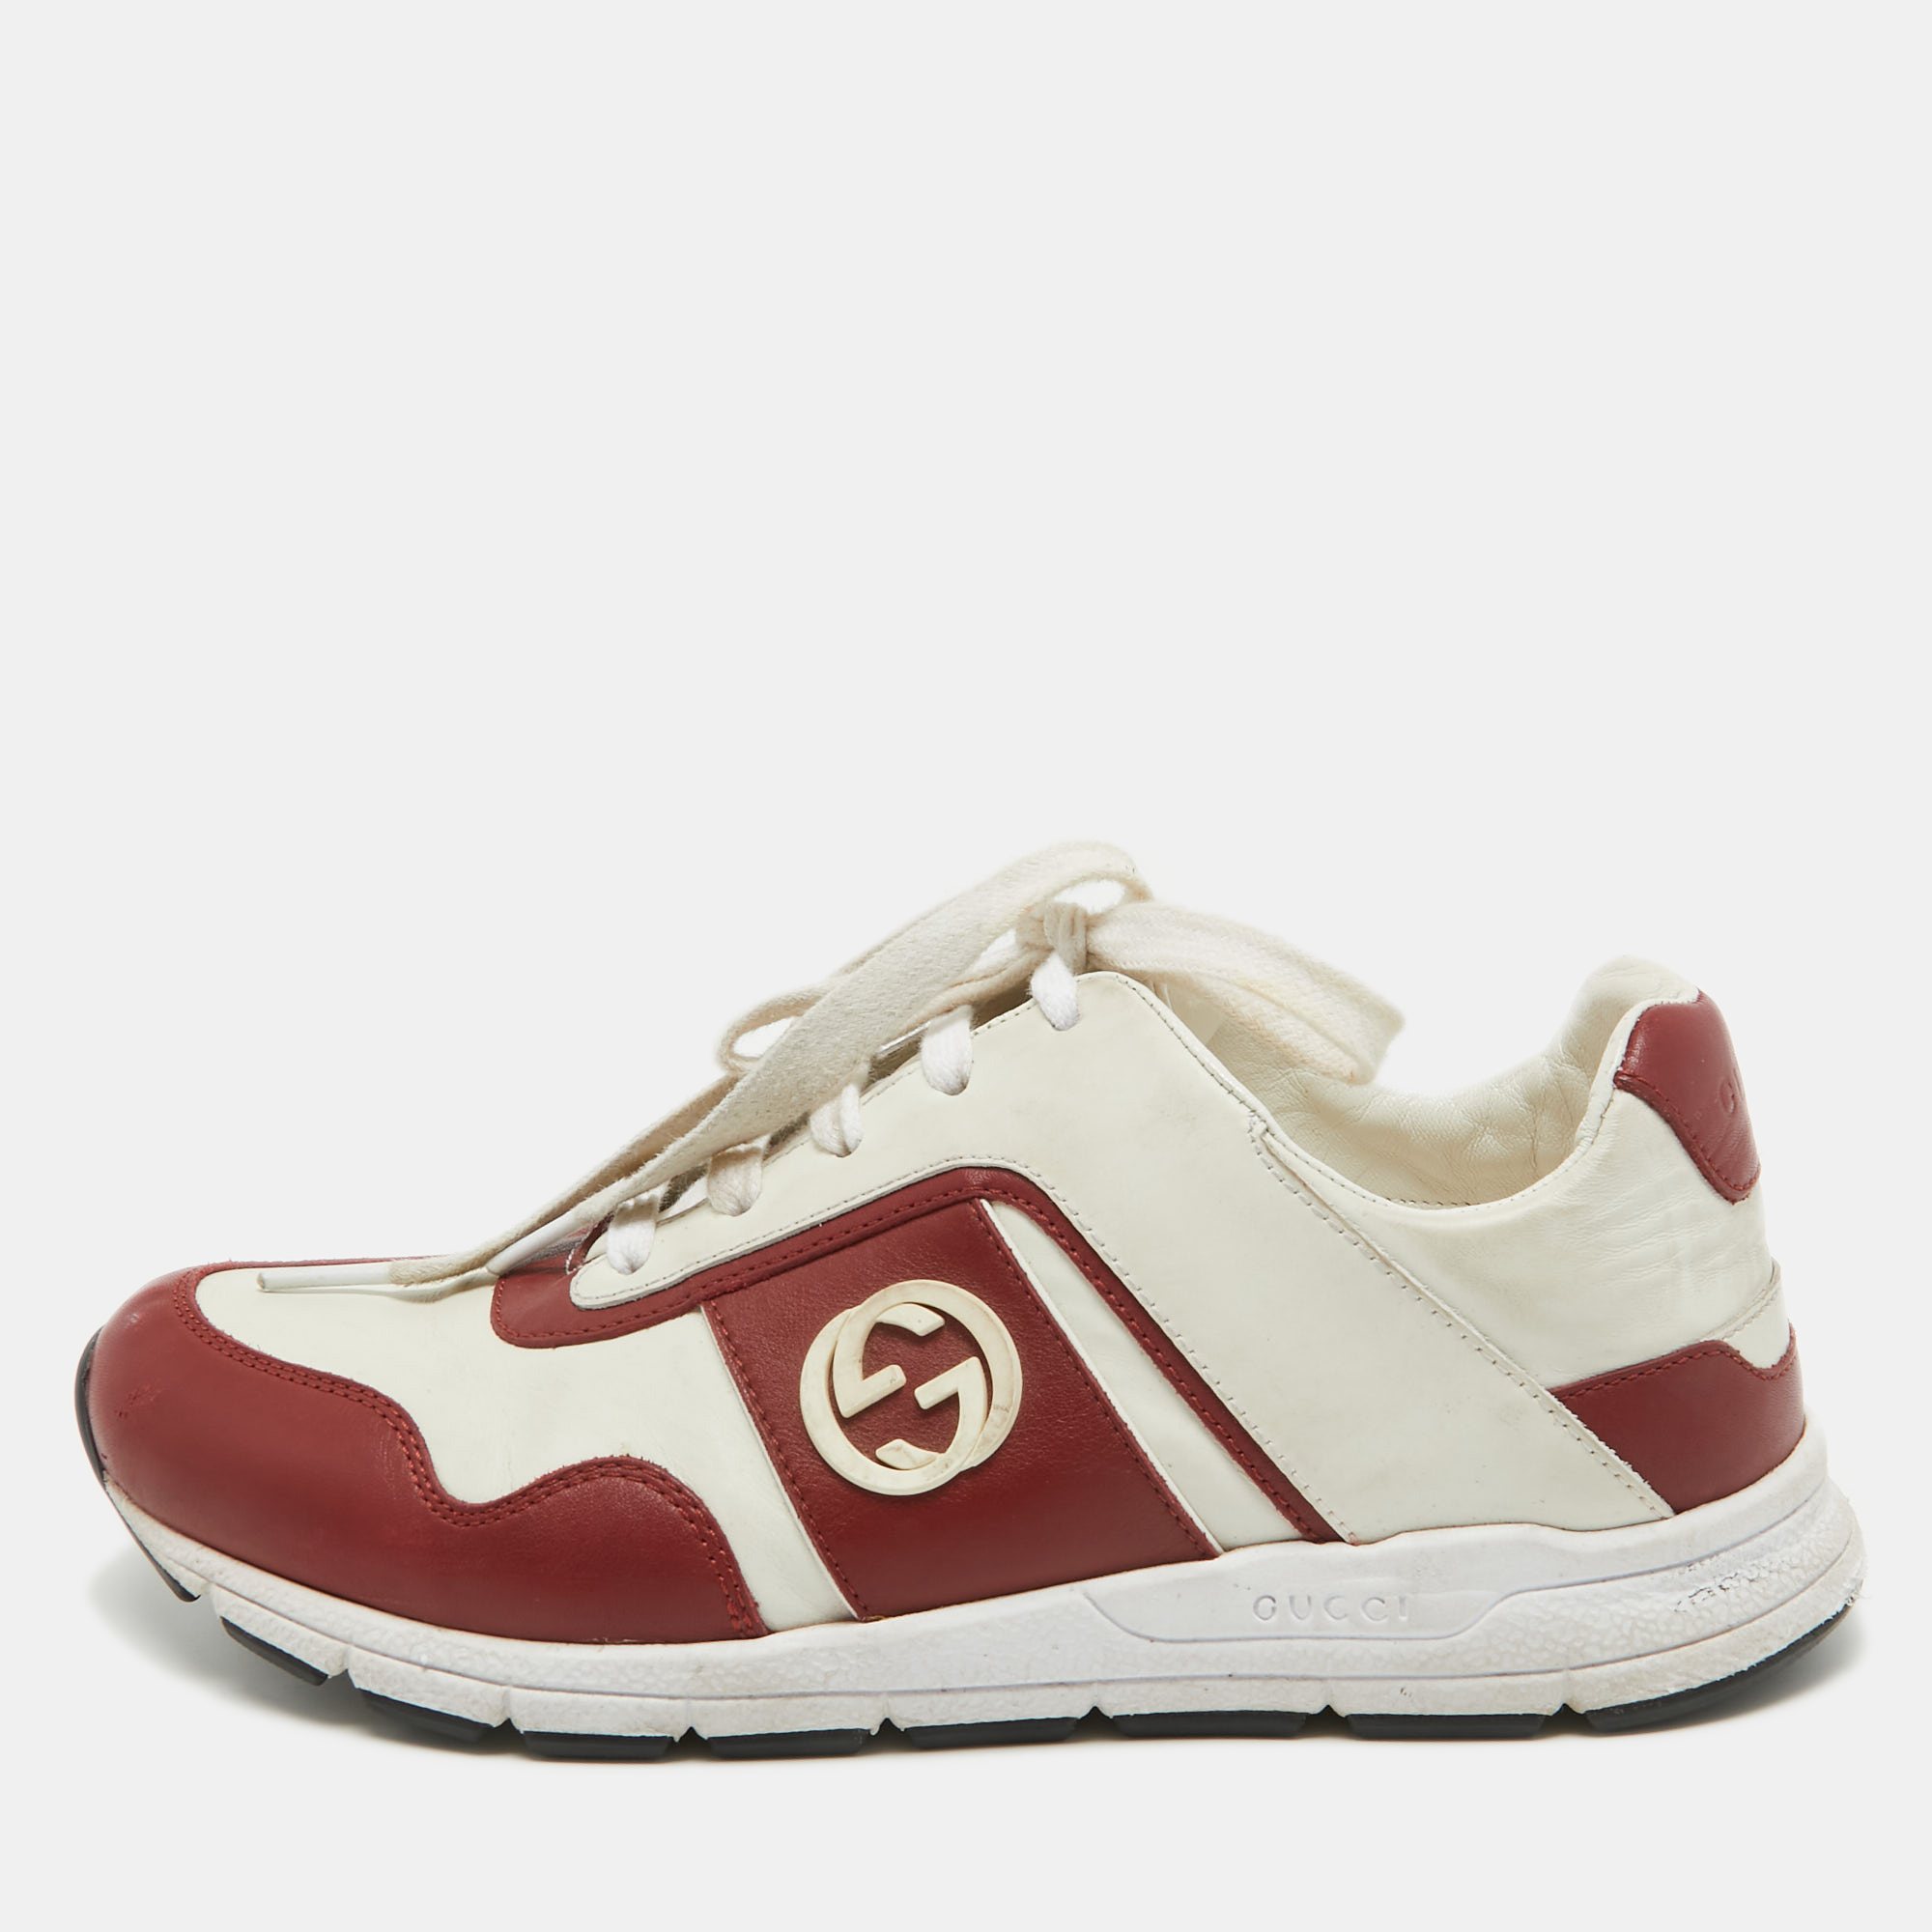 Gucci dark red/white leather interlocking g low top sneakers size 37